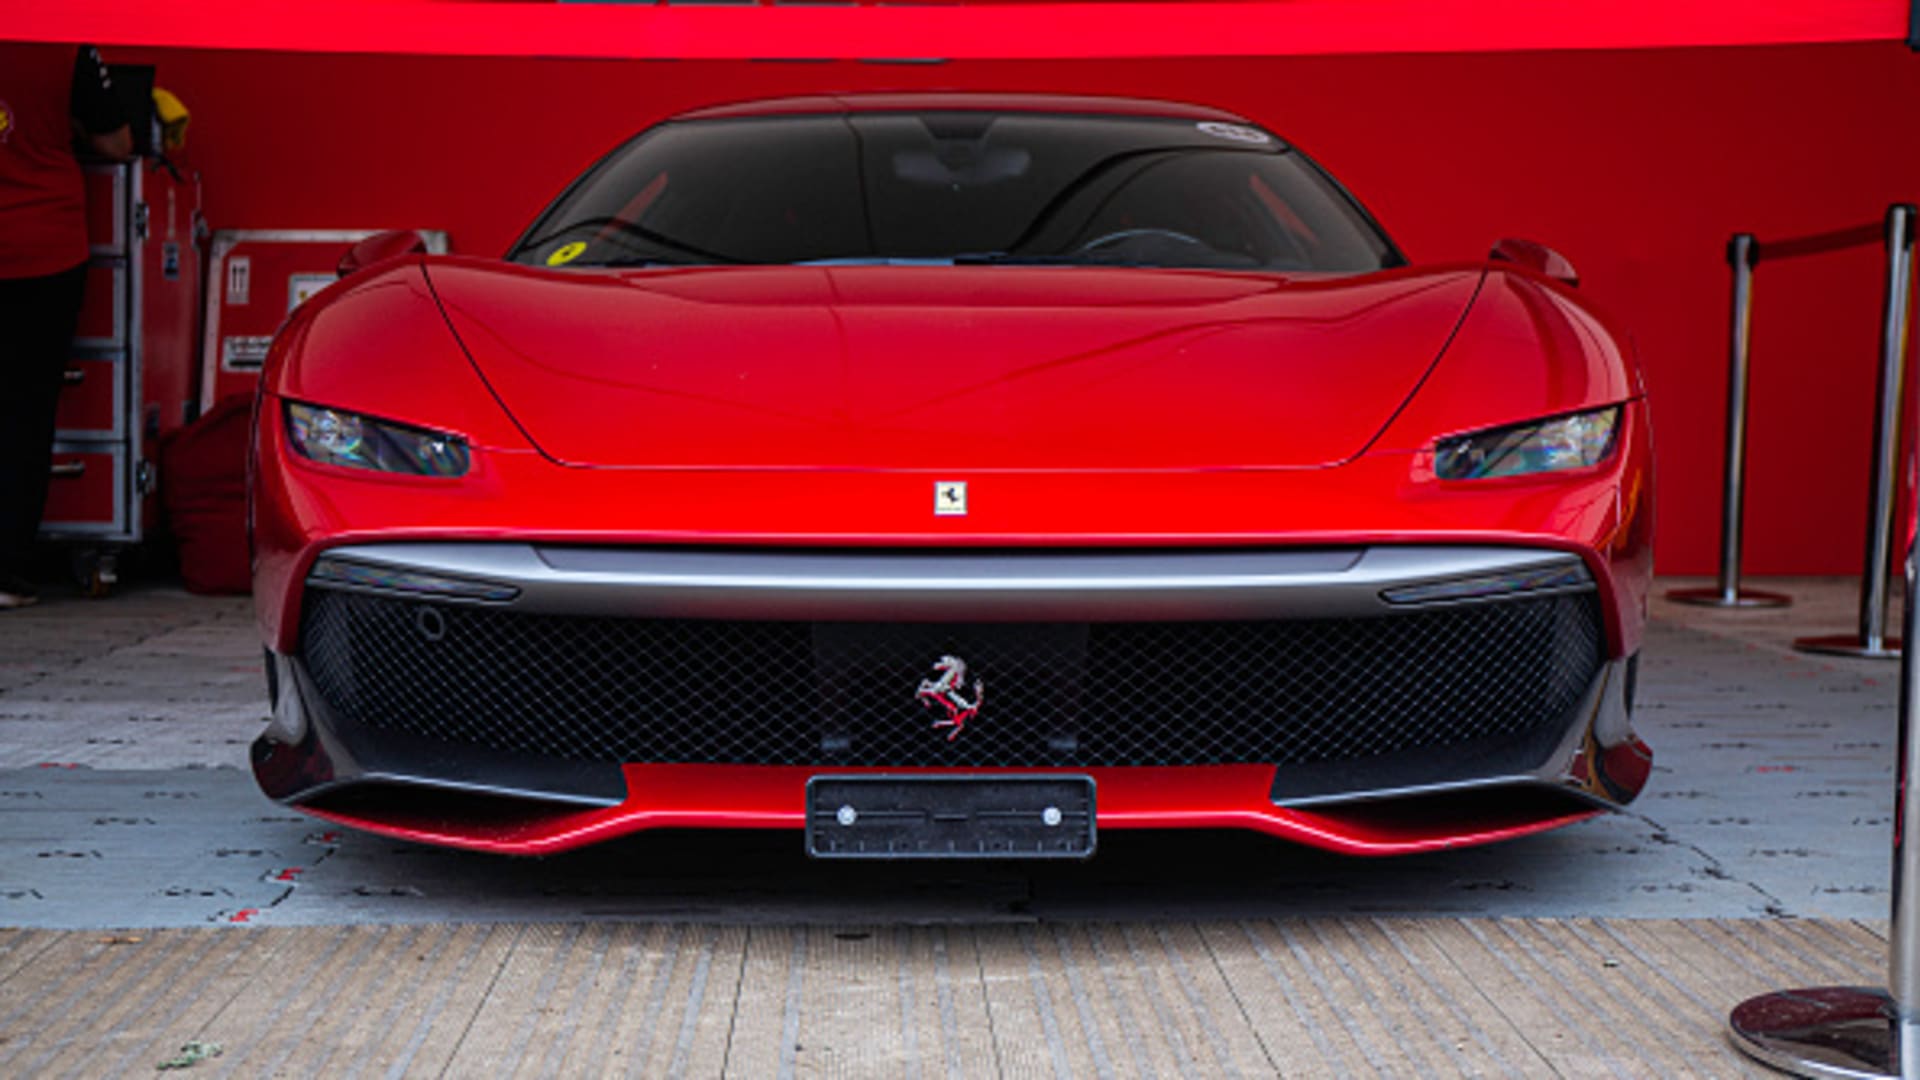 Ferrari boosts full-year guidance after a record second quarter